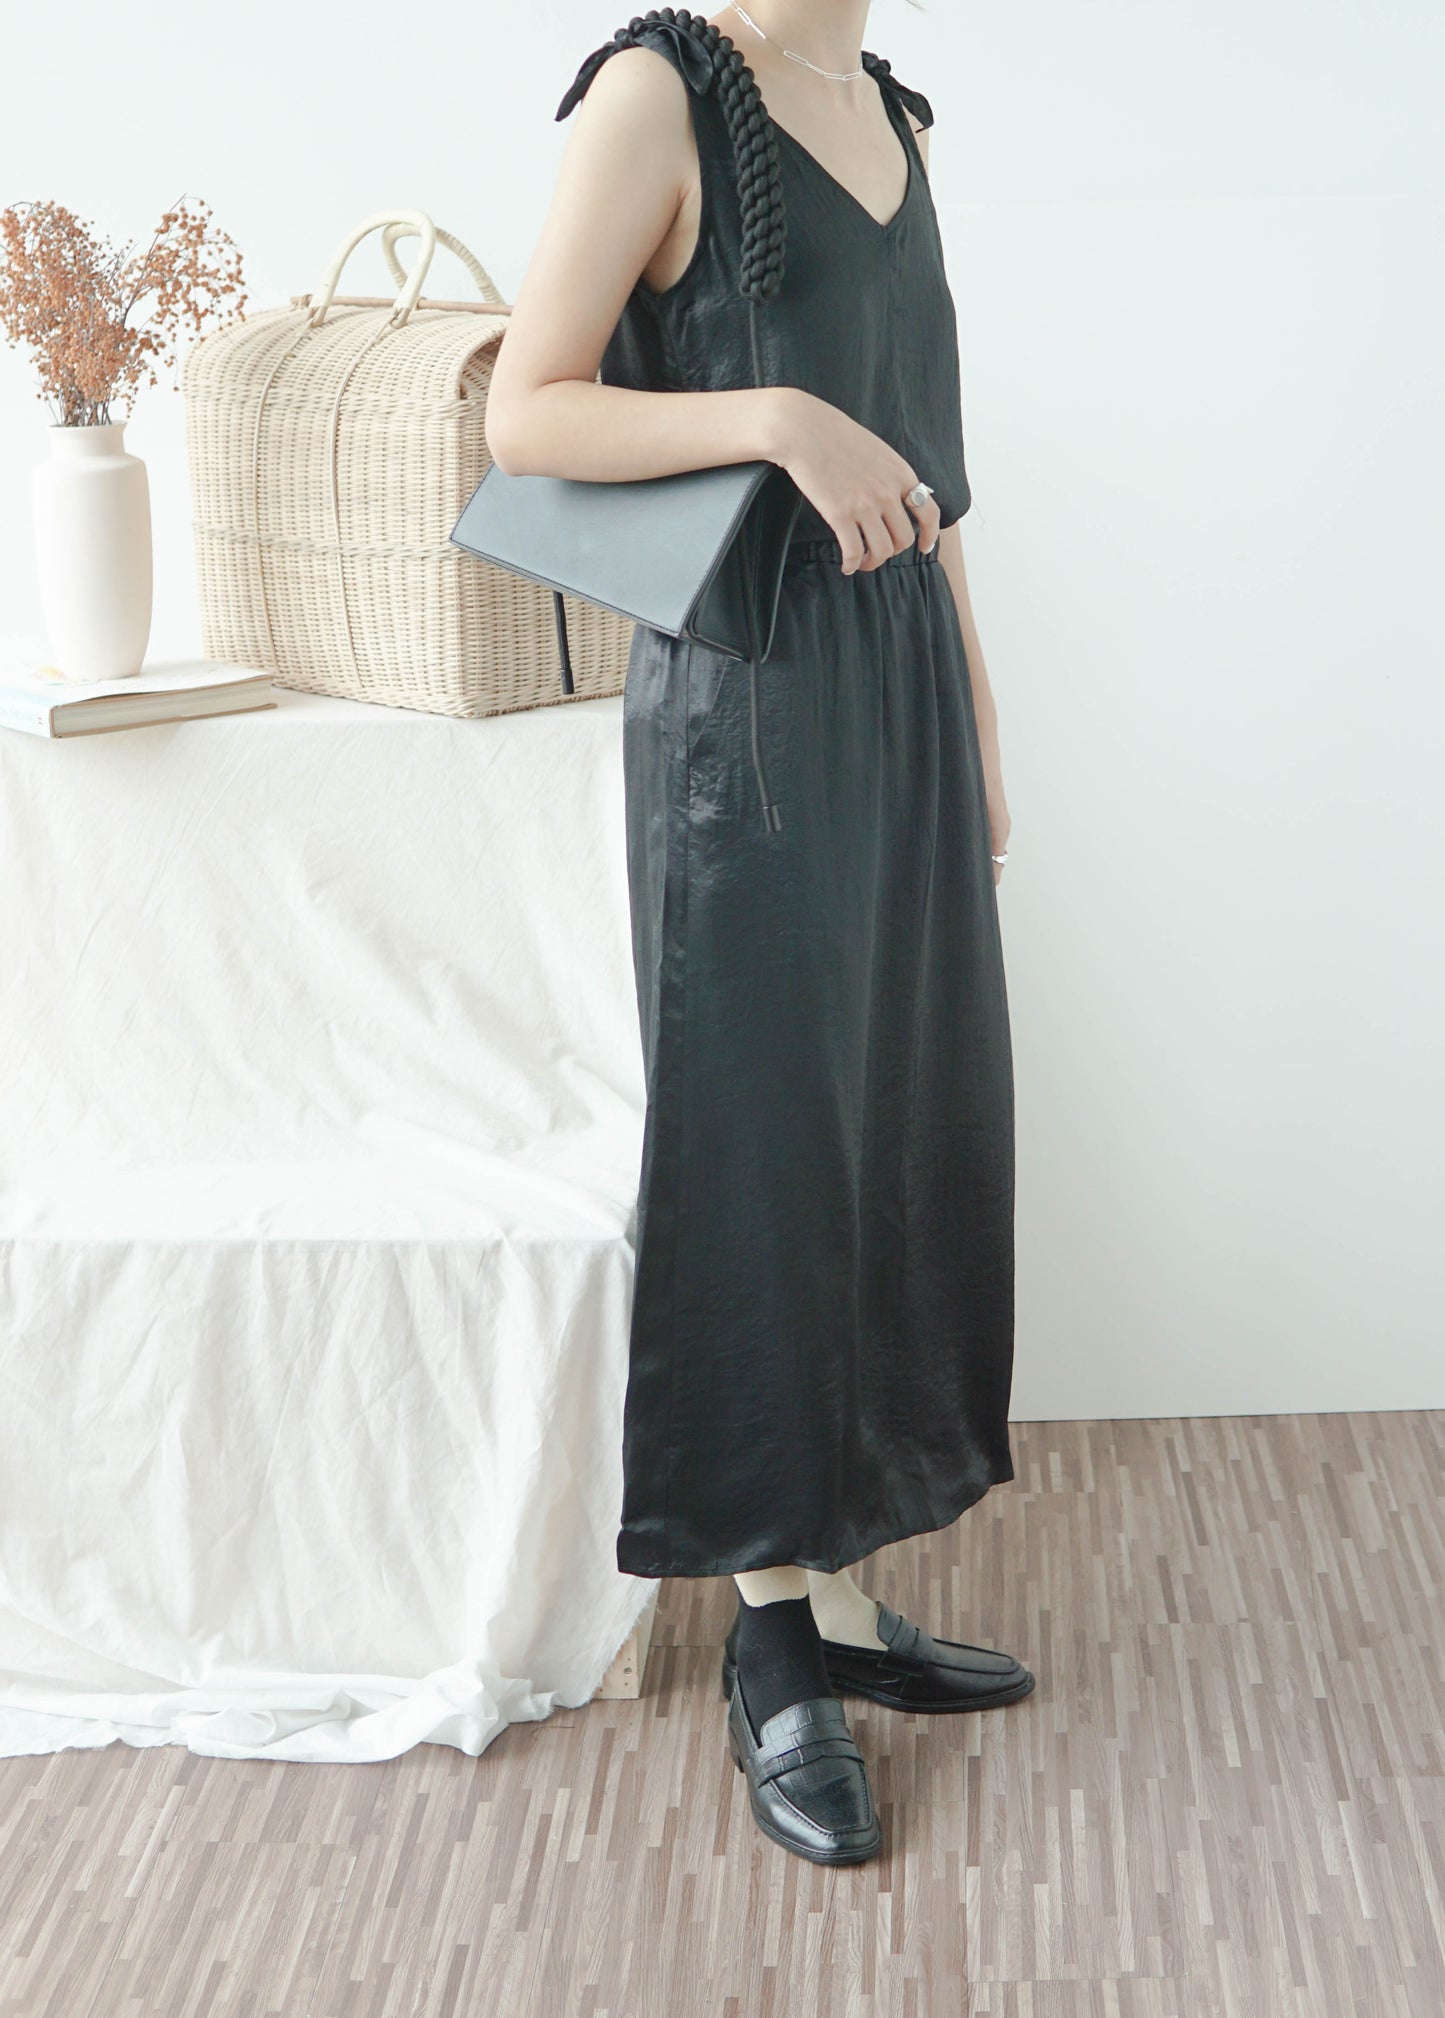 High-waist thin solid color skirt A-line skirt in classic black